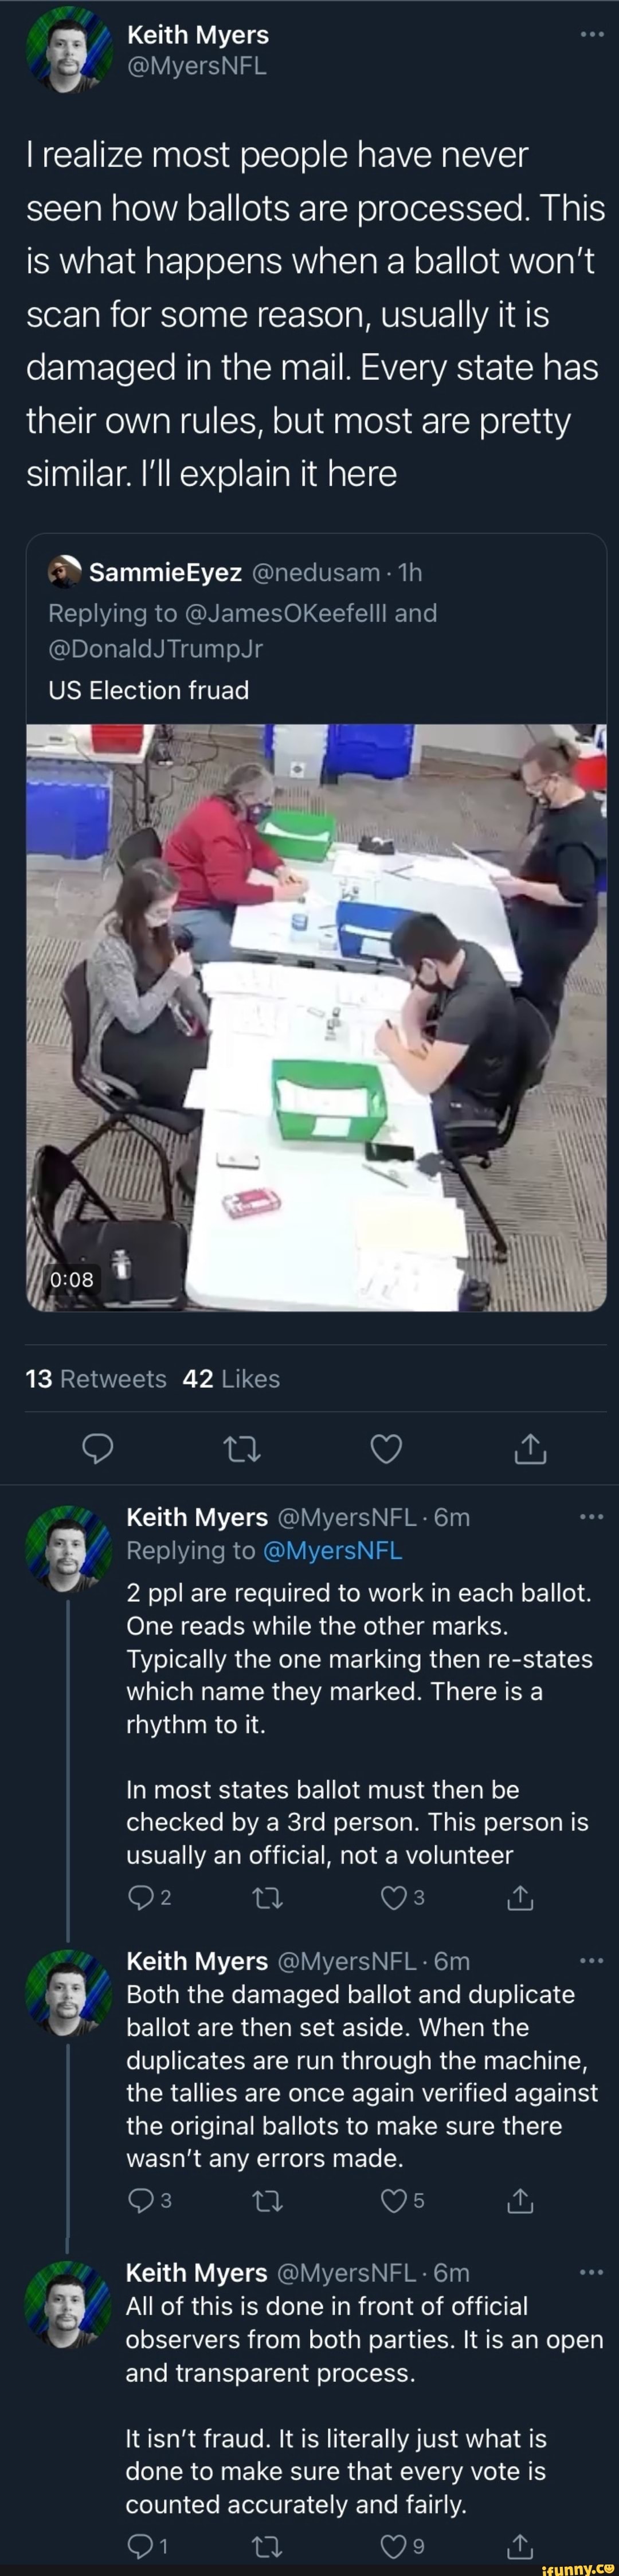 Keith Myers I Realize Most People Have Never Seen How Ballots Are Processed This Is What Happens When A Ballot Won T Scan For Some Reason Usually It Is Damaged In The Mail